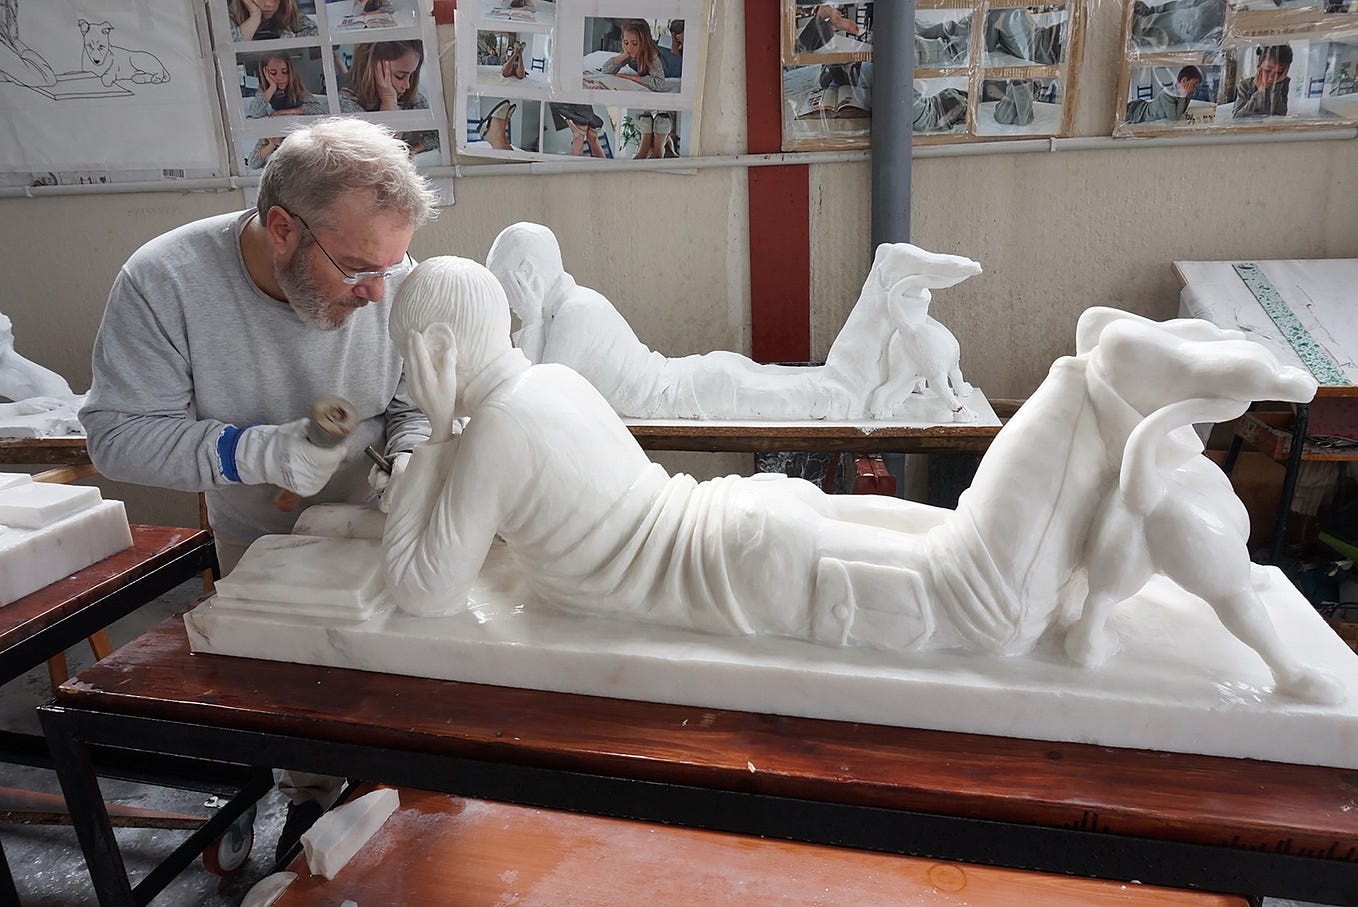 A sculptor chiseling away a block of marble to reveal a statue of a man, laying on his stomach with his head in his hands.